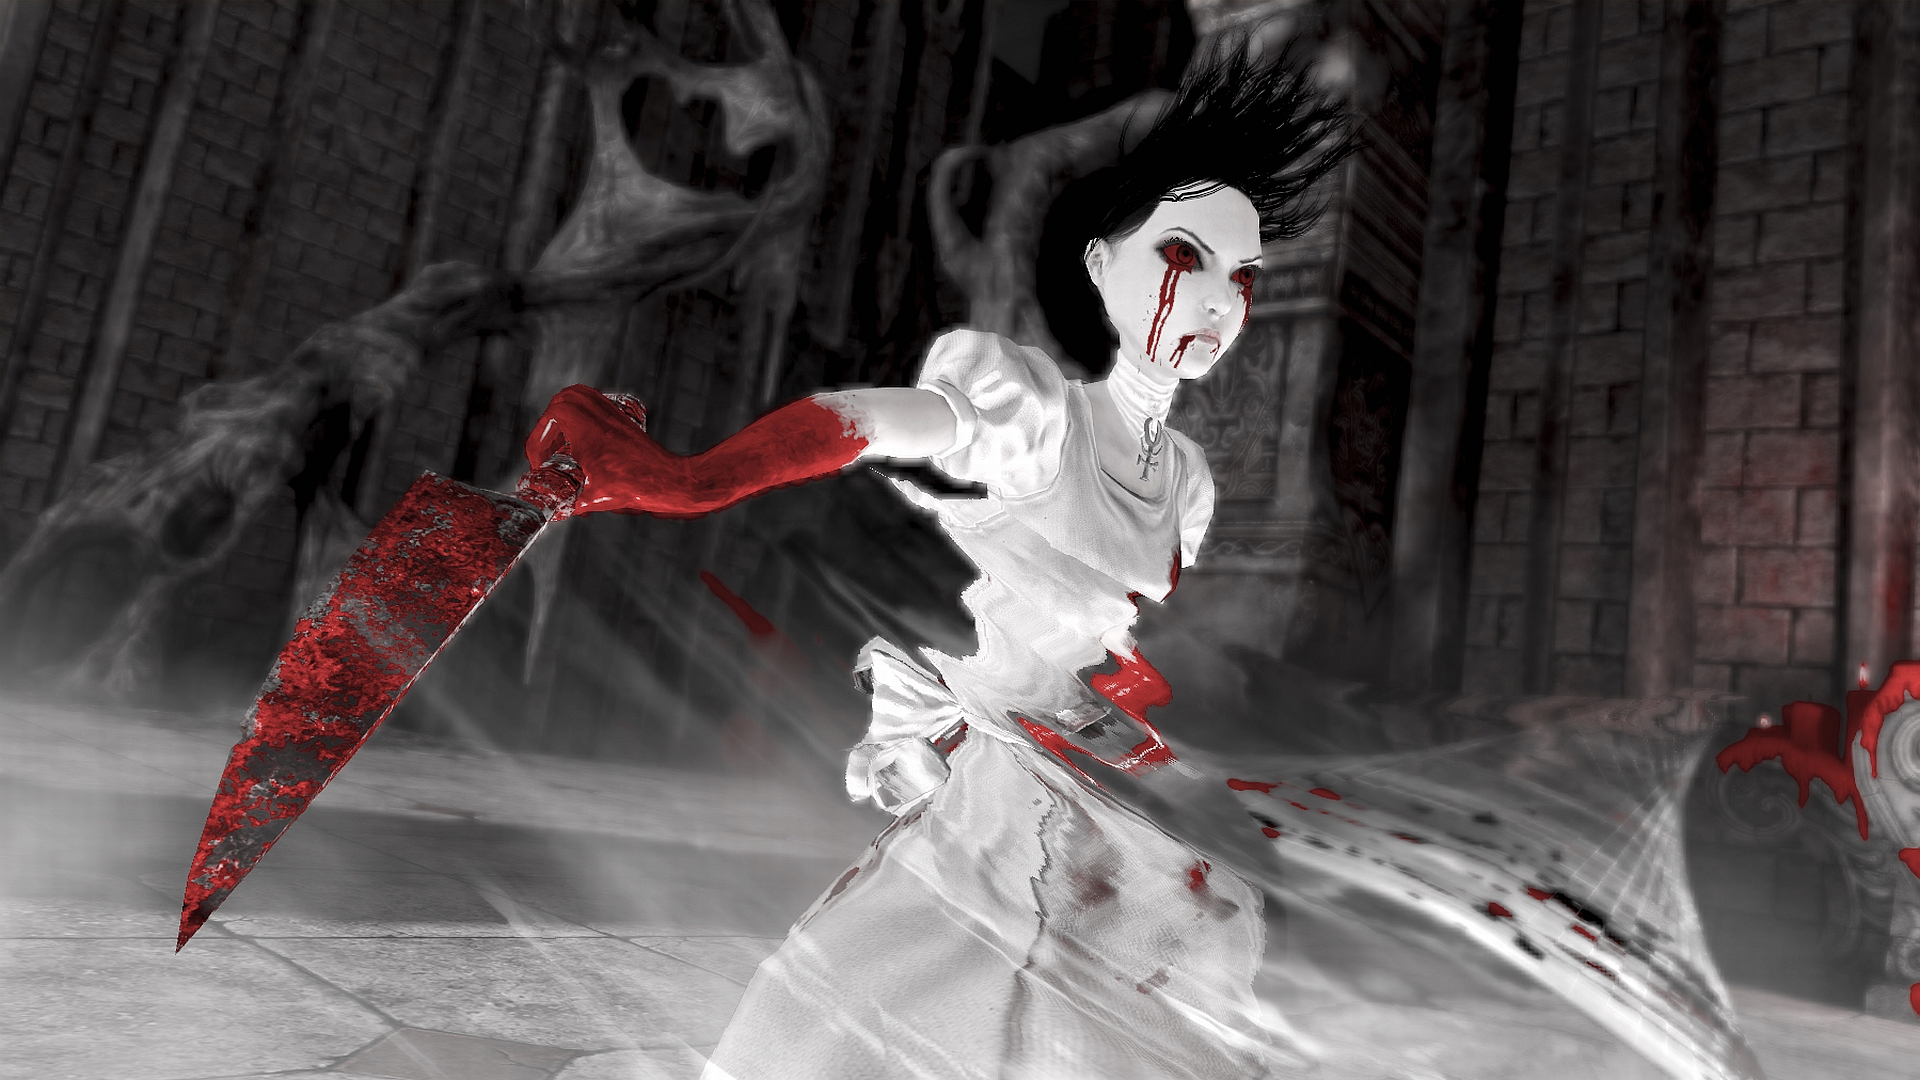 New Lock Screen Wallpapers alice: madness returns, video game